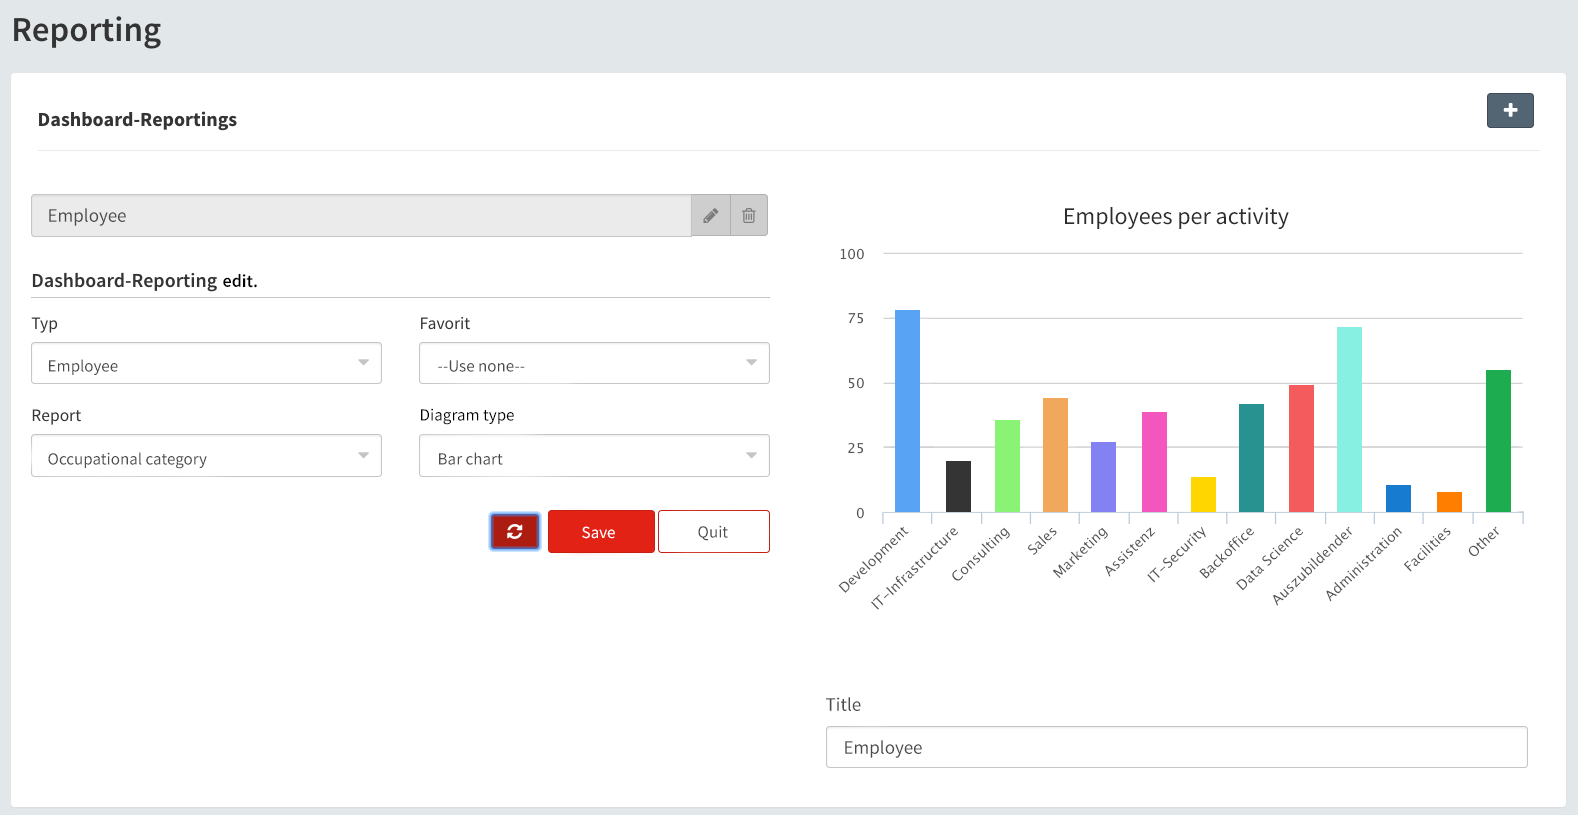 Configuration of the reporting view in the dashboard